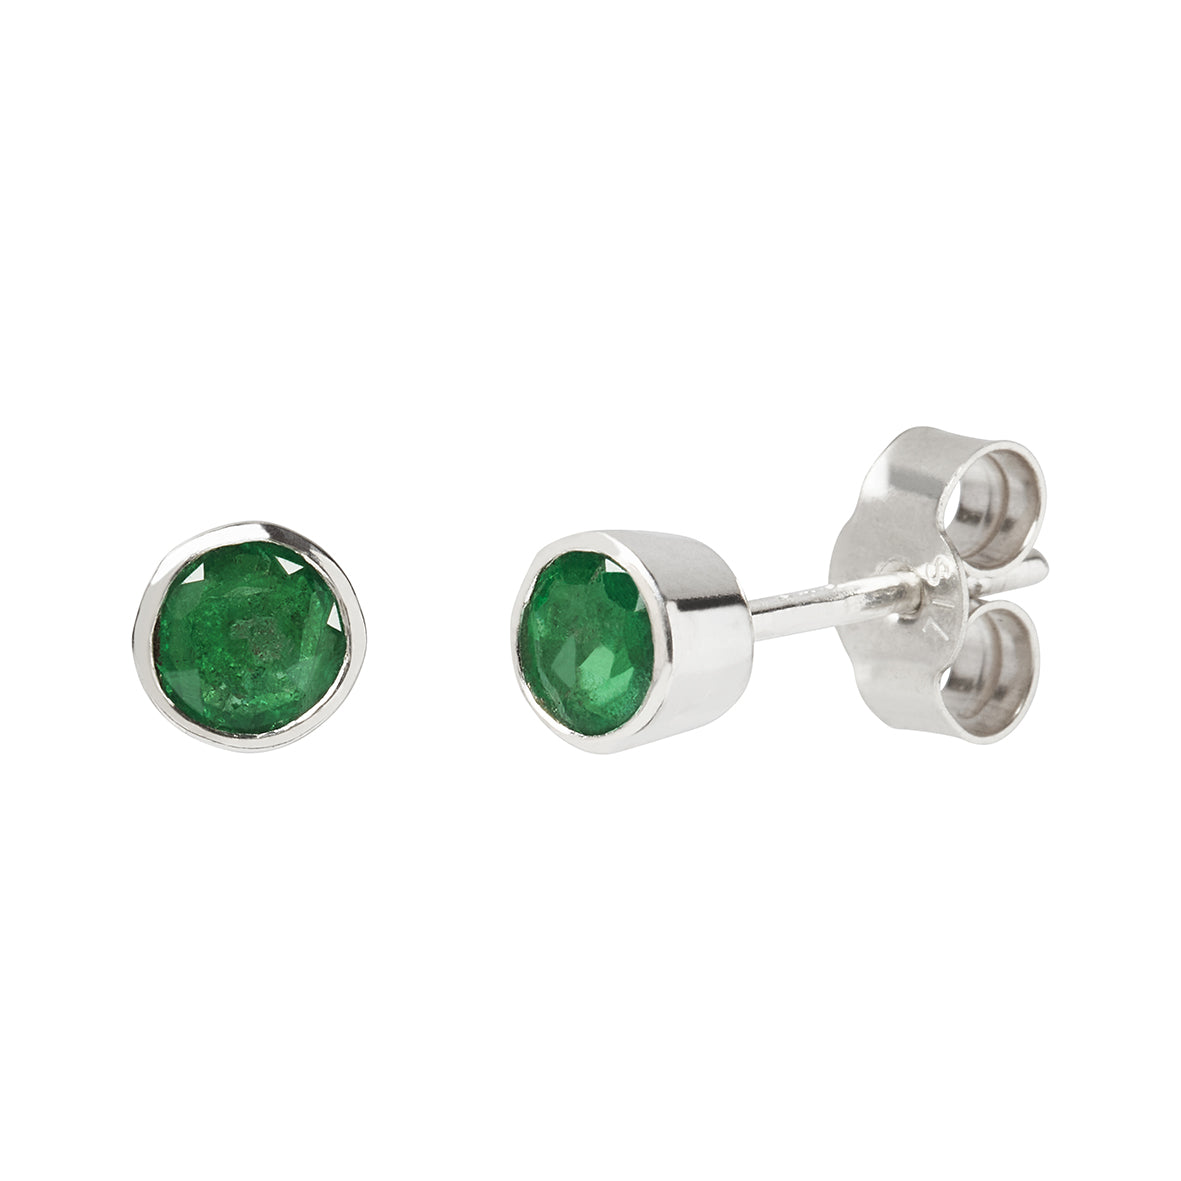 Emerald and Silver Stud Earrings